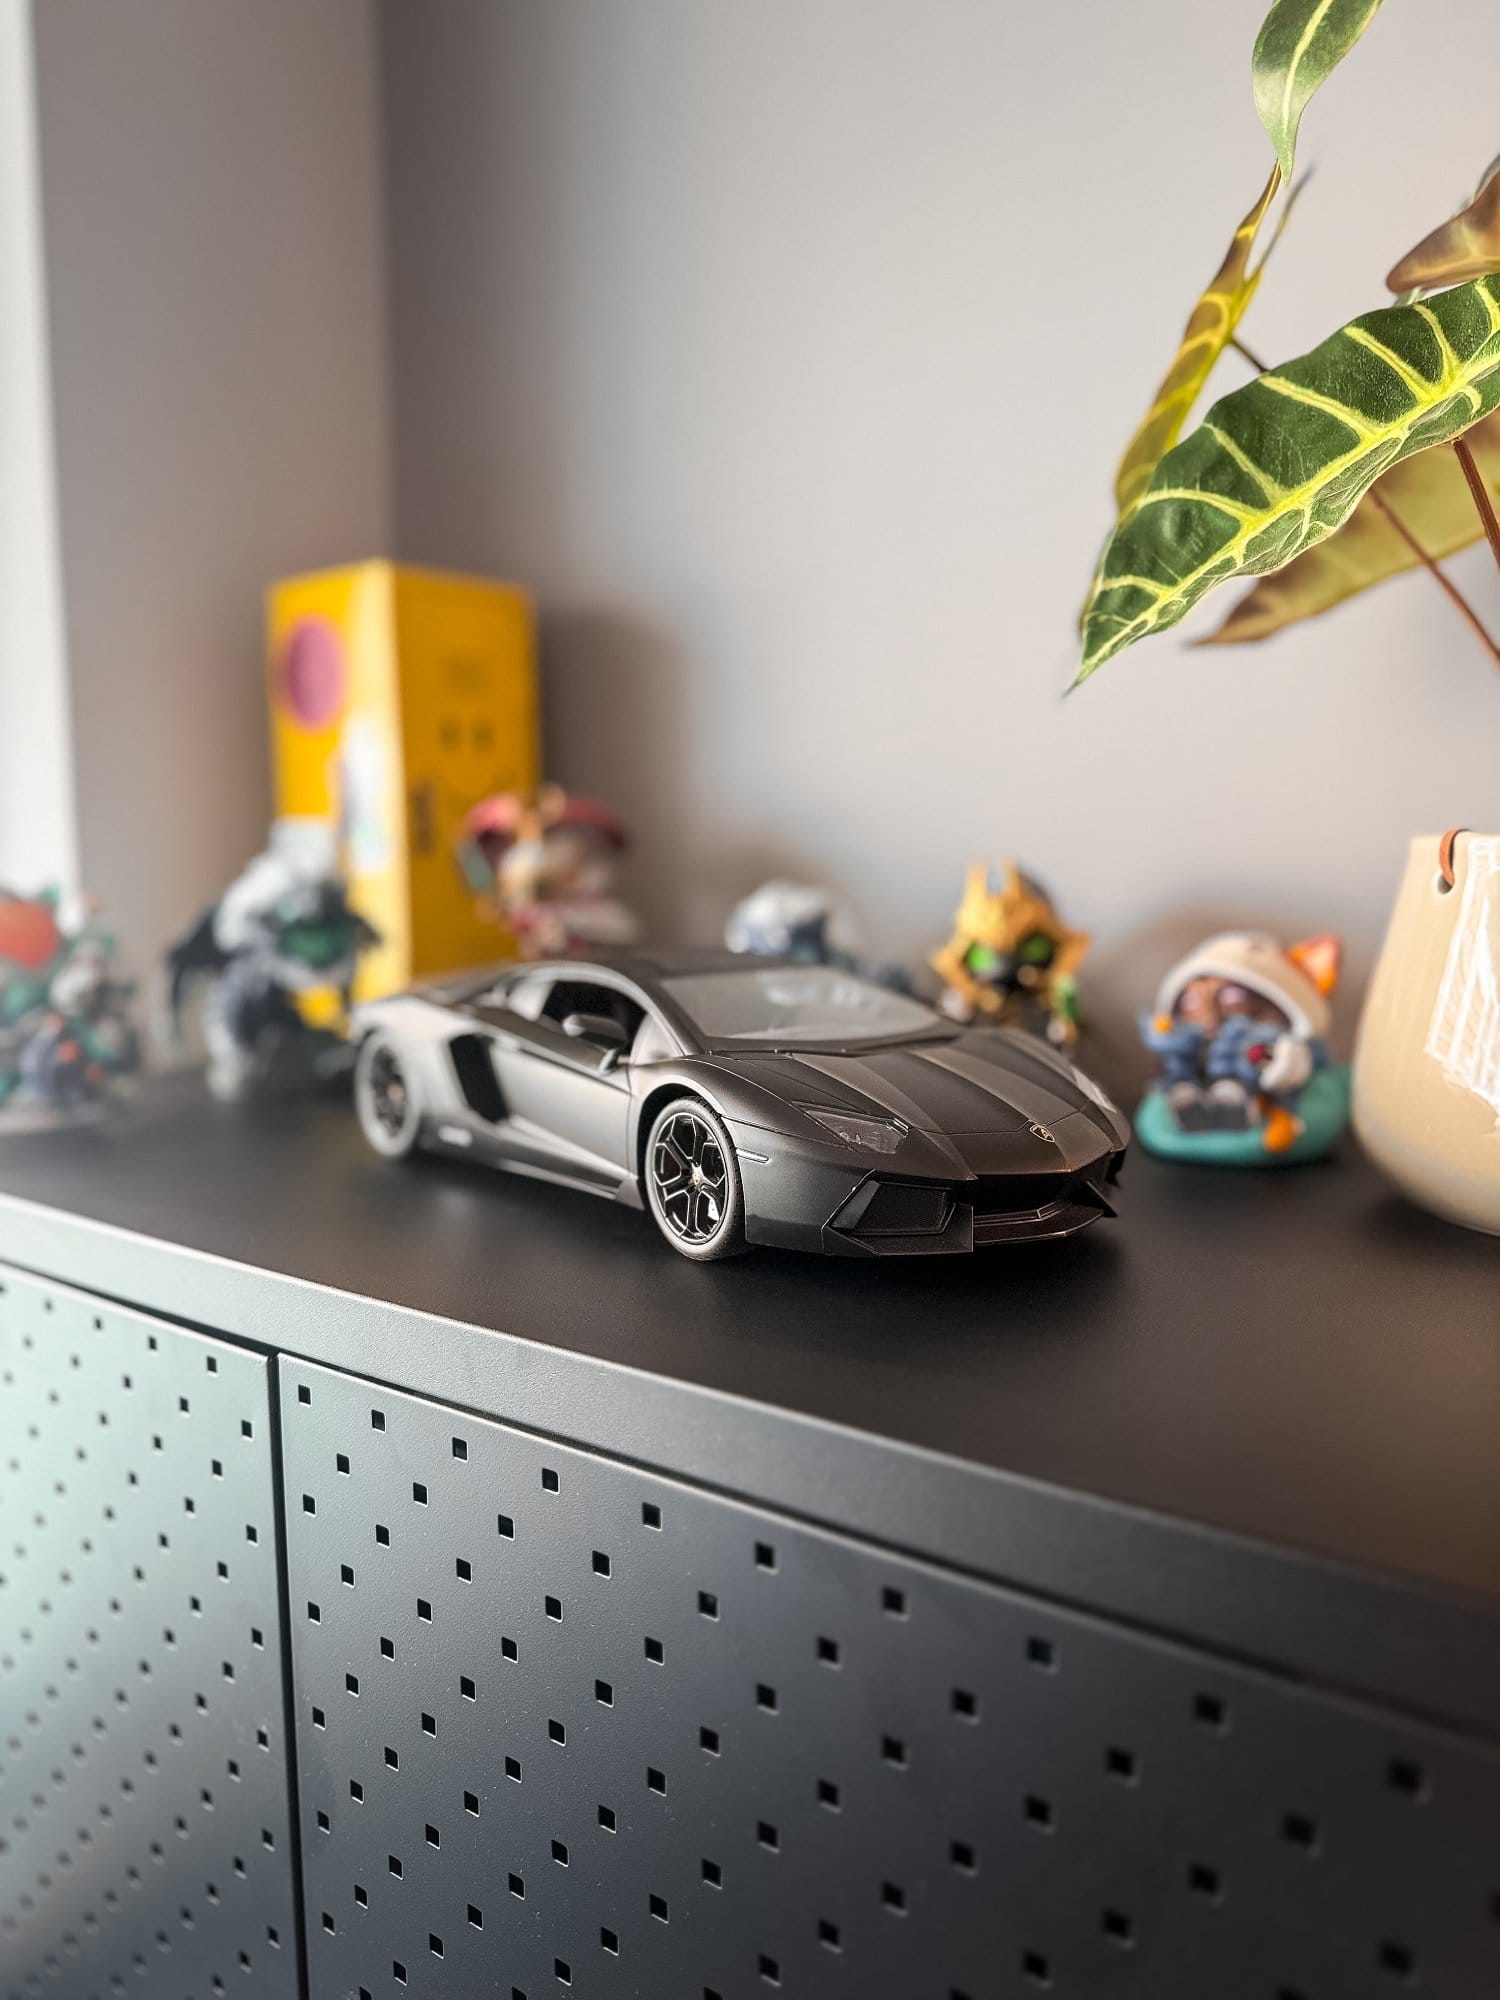 A close-up of a black perforated shelf displaying a model car, surrounded by various small figurines and a plant in a ceramic pot